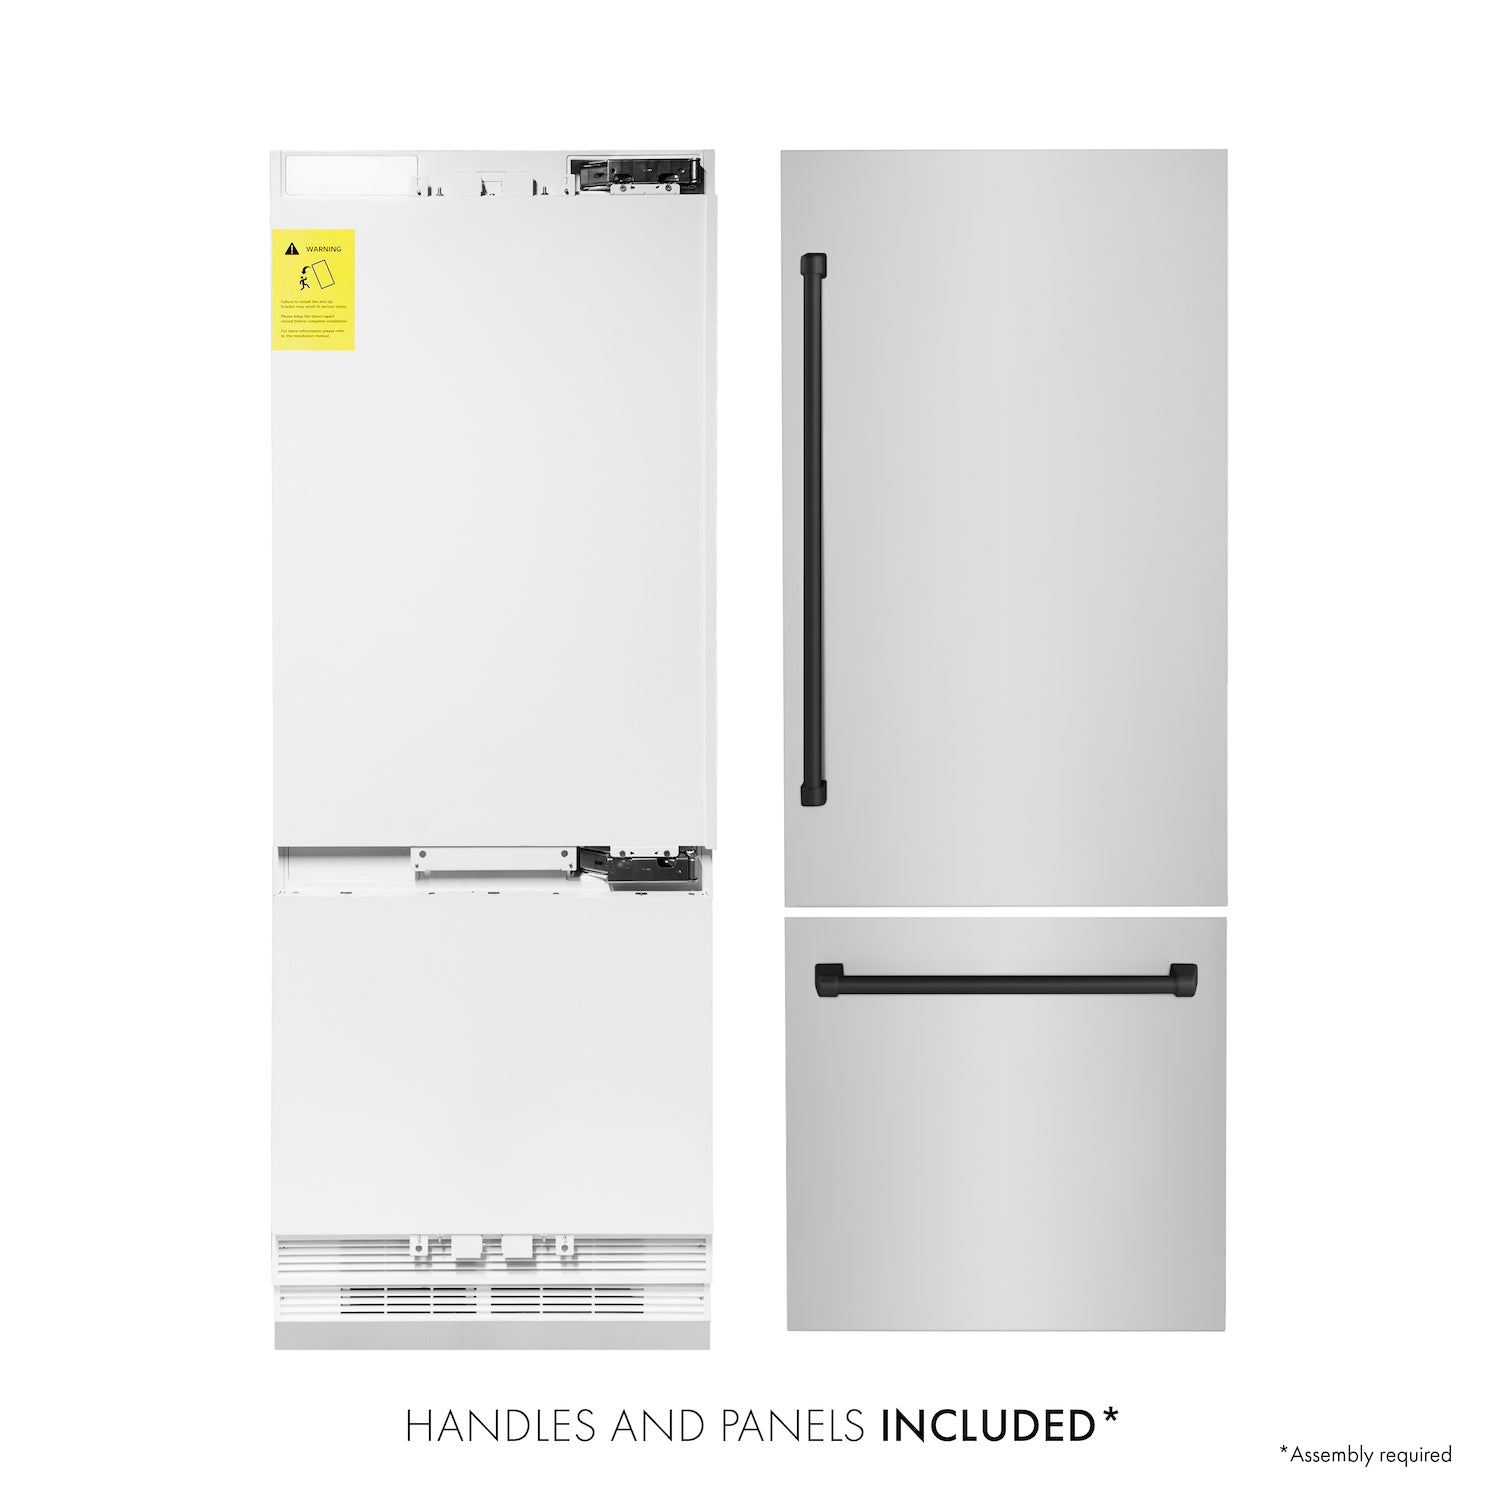 ZLINE Autograph Edition 30 in. Built-In Panel Ready Refrigerator next to Stainless Steel Panels with Matte Black Accents, front, door closed.